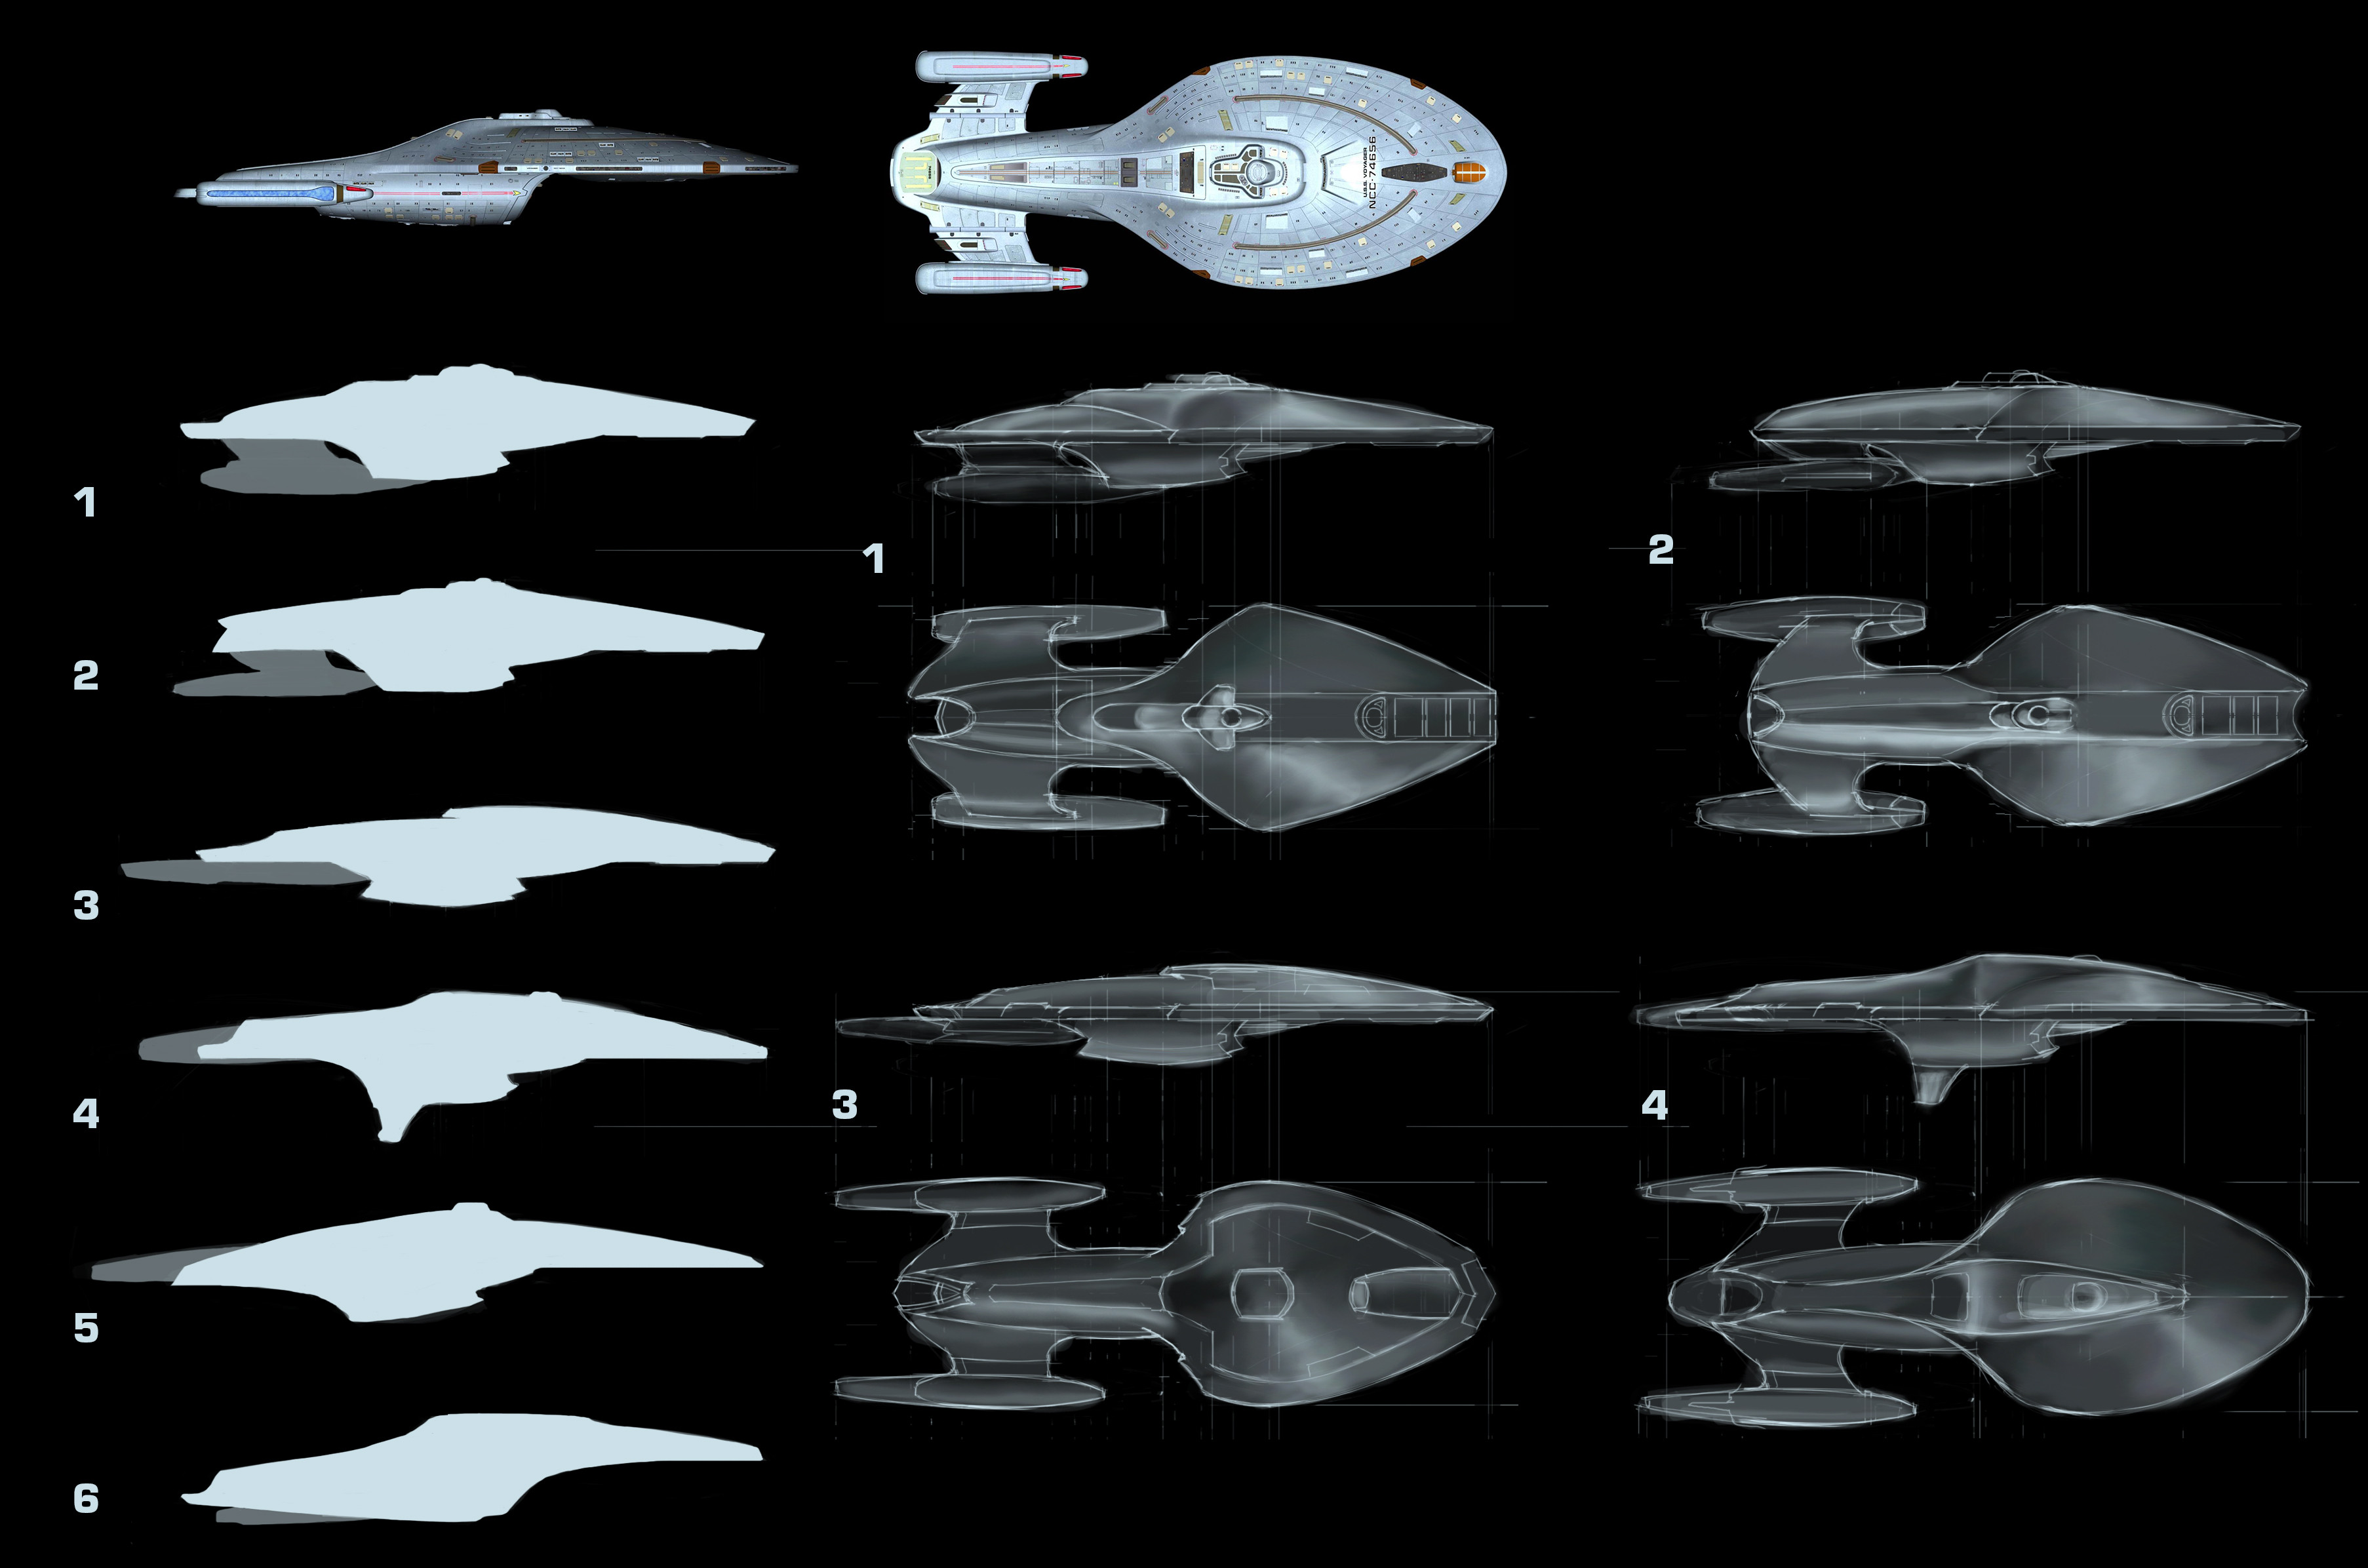 Concept sketches for the Pathfinder's general shape.